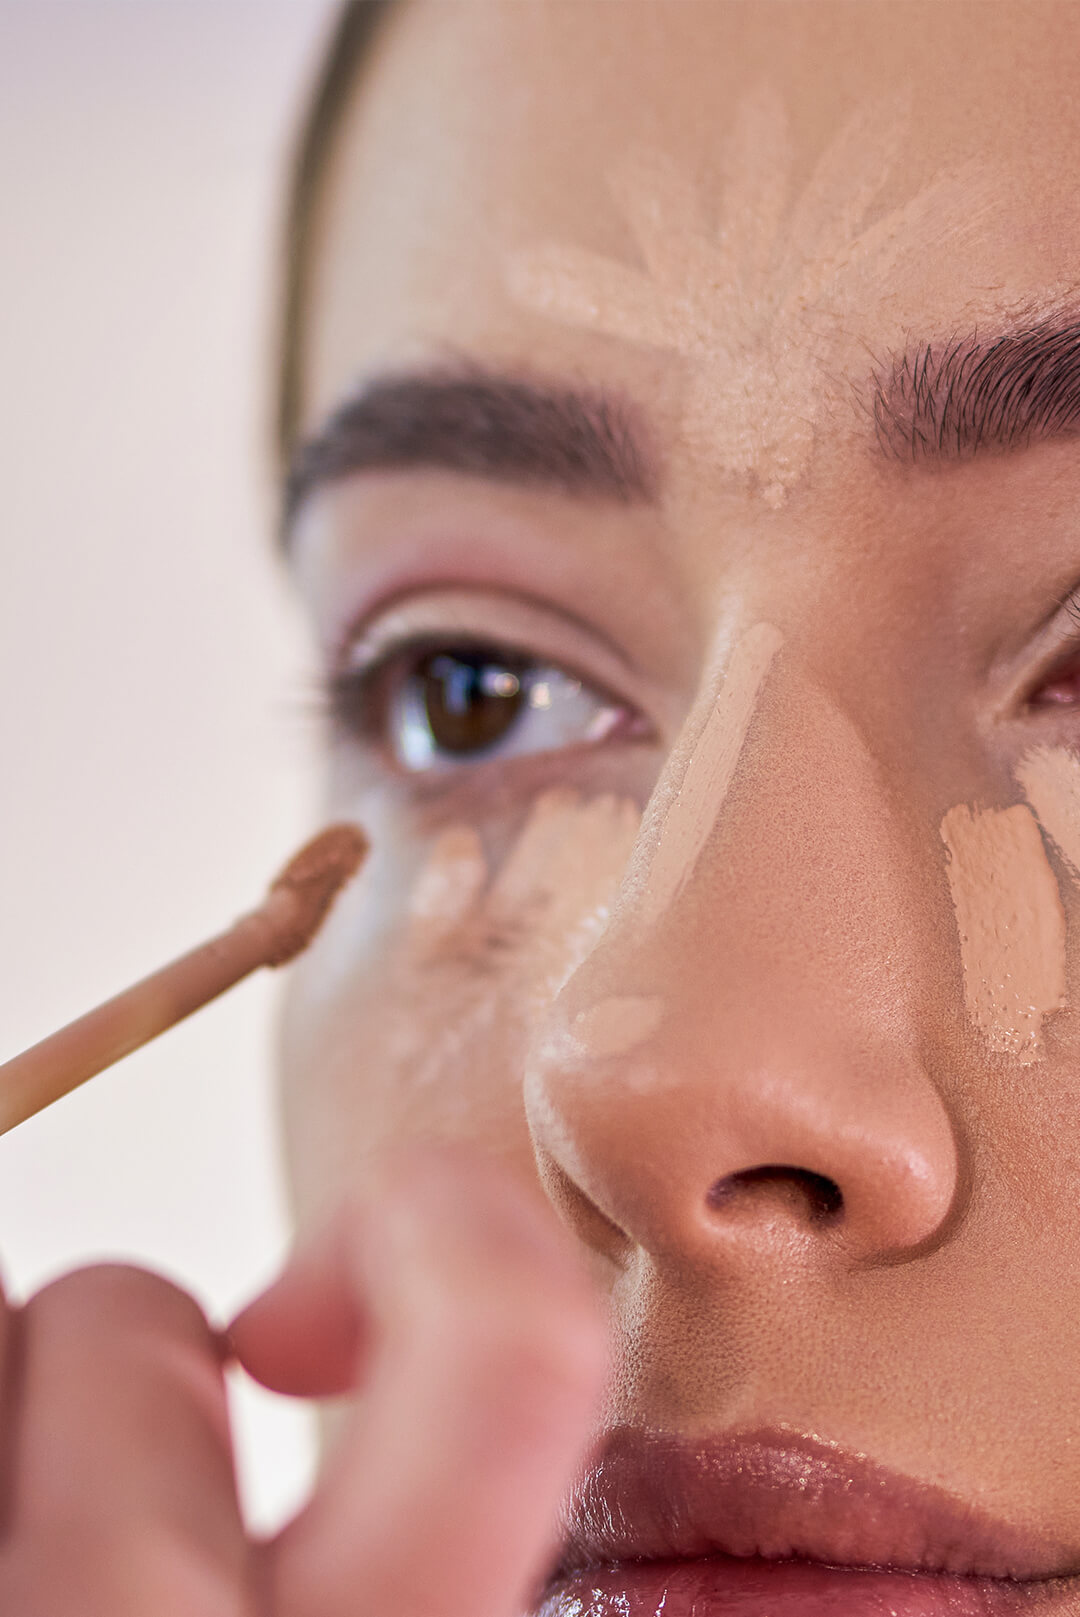 How To Prevent Concealer From Creasing